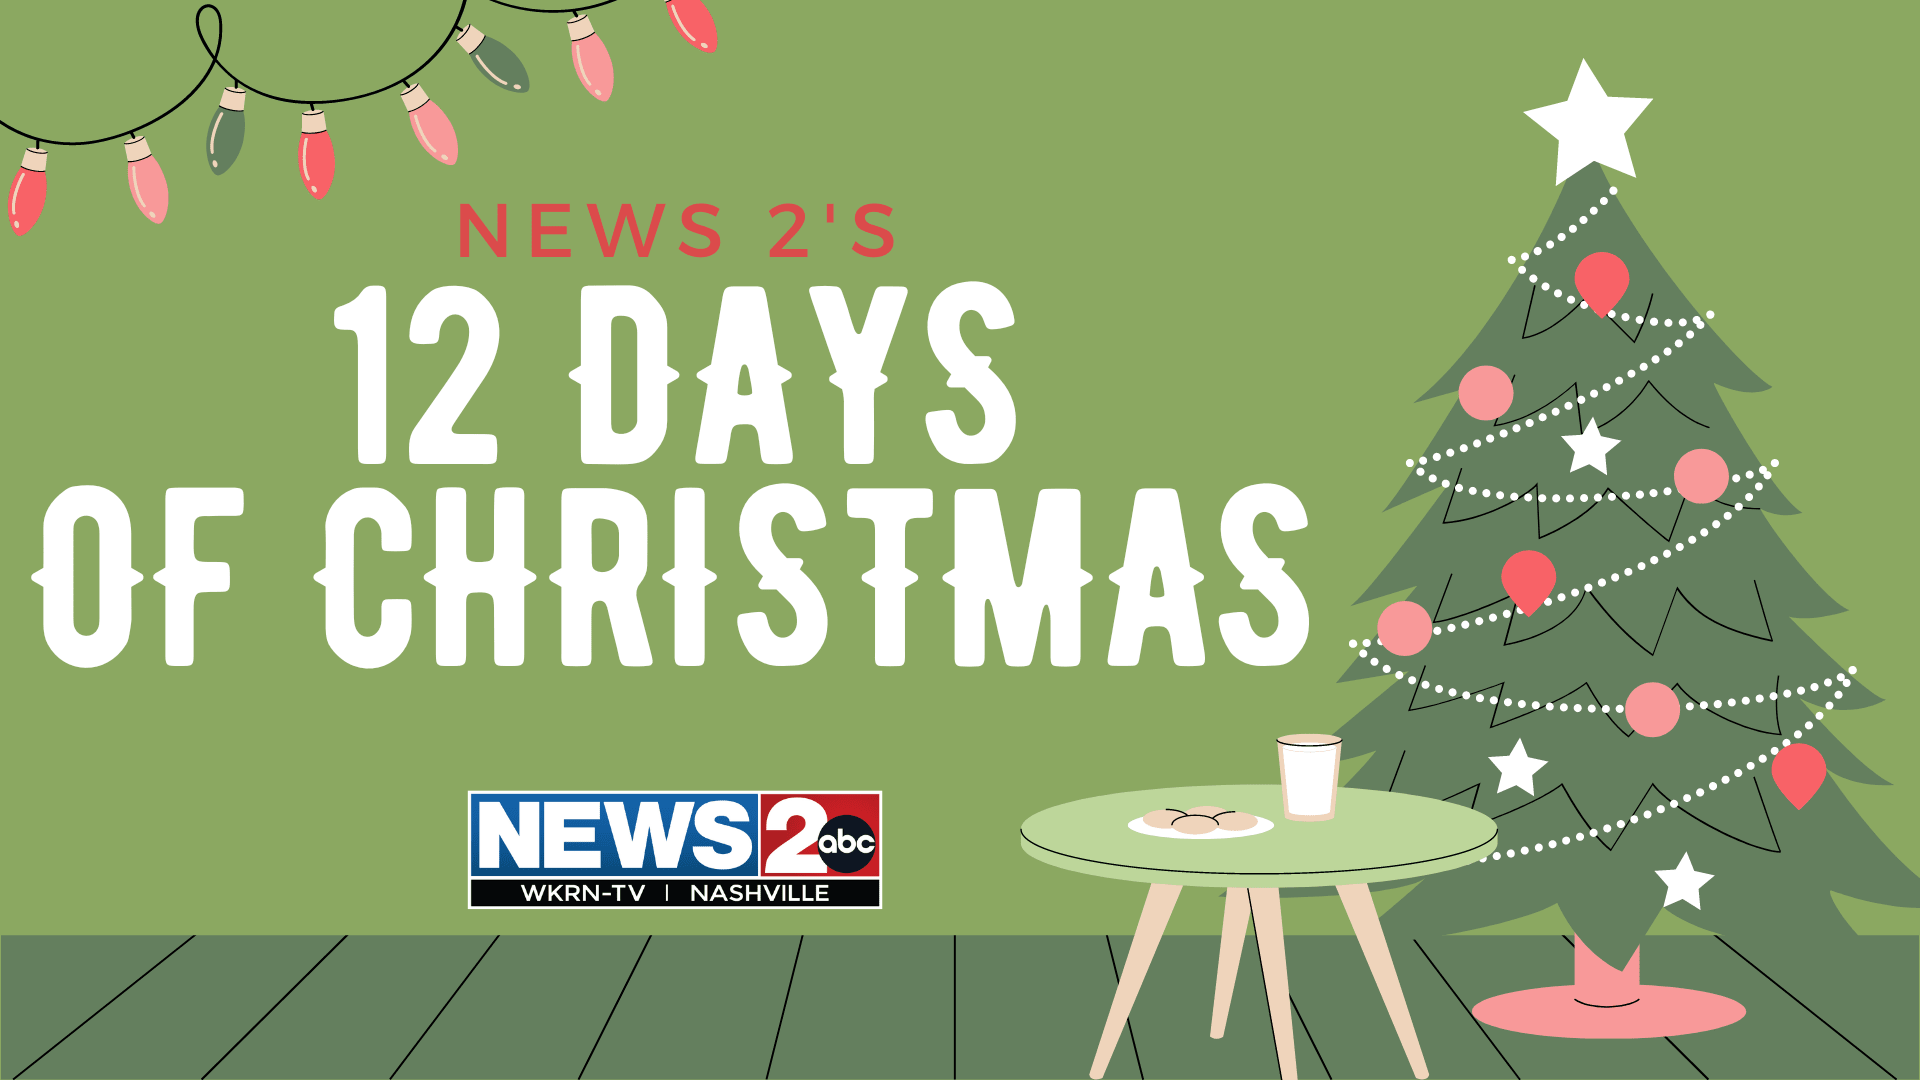 ENDED: Win daily prizes in News 2's 12 Days of Christmas | WKRN News 2